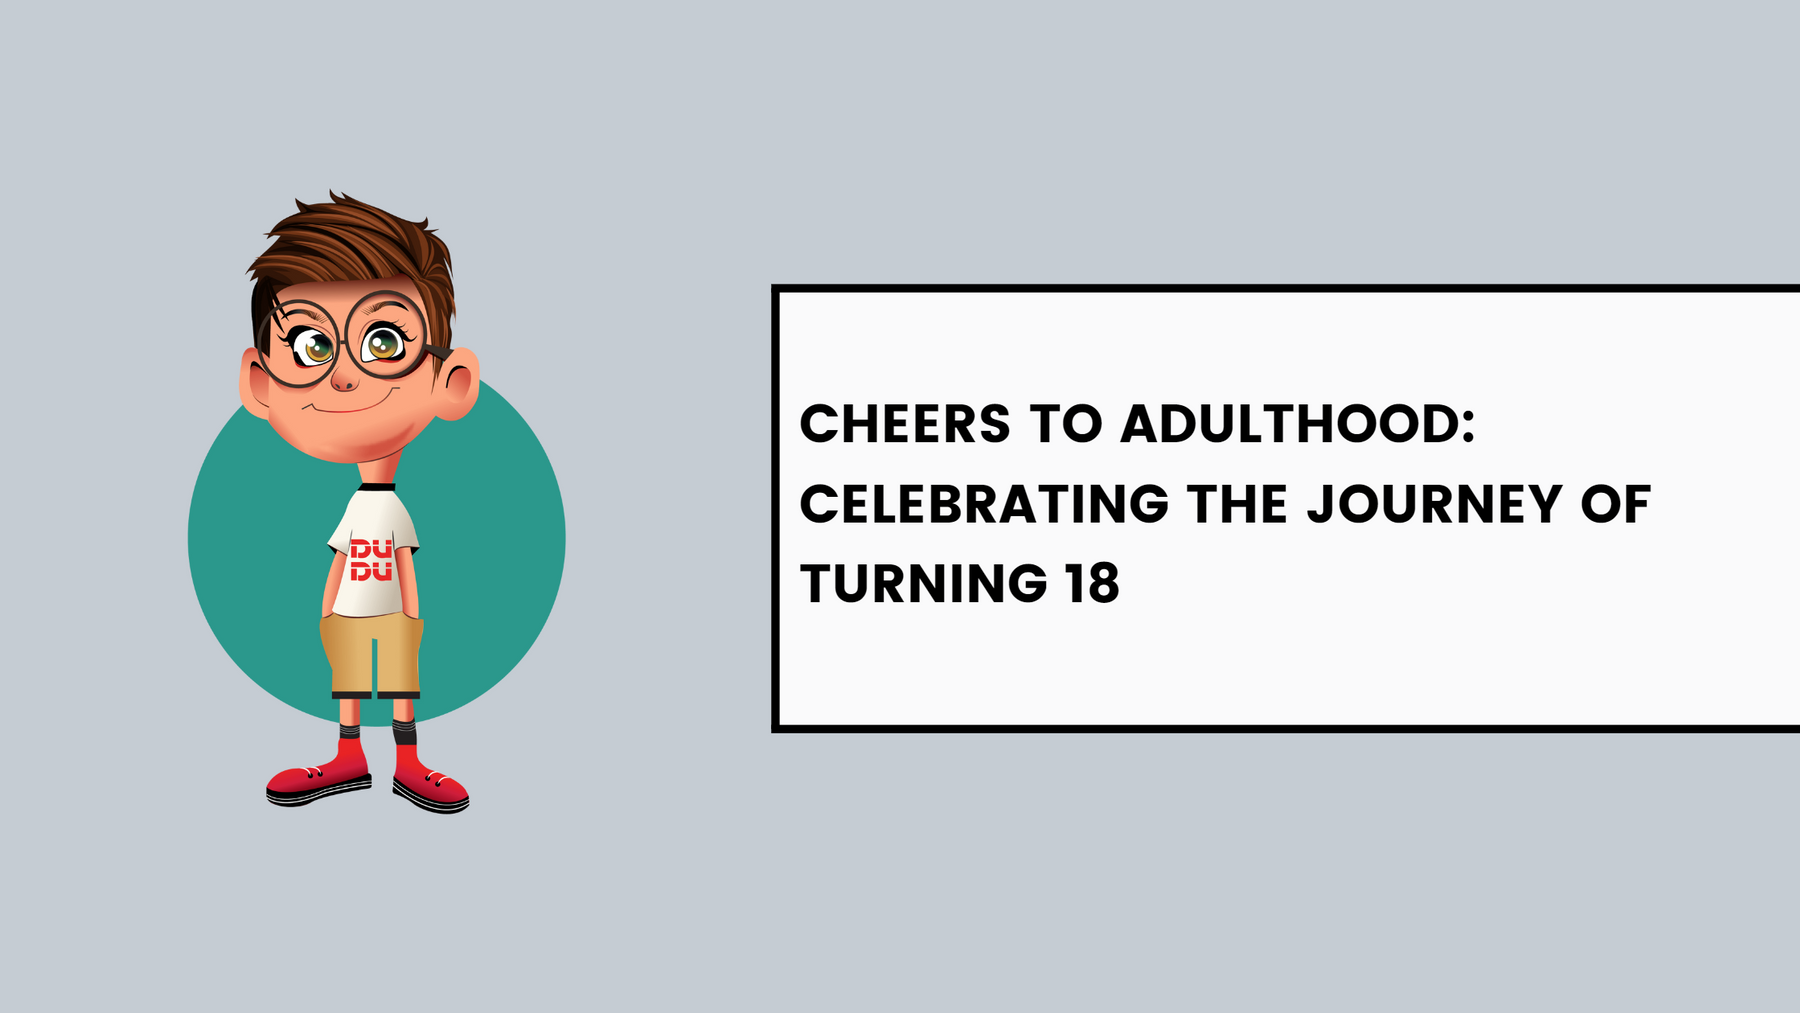 Cheers to Adulthood: Celebrating the Journey of Turning 18